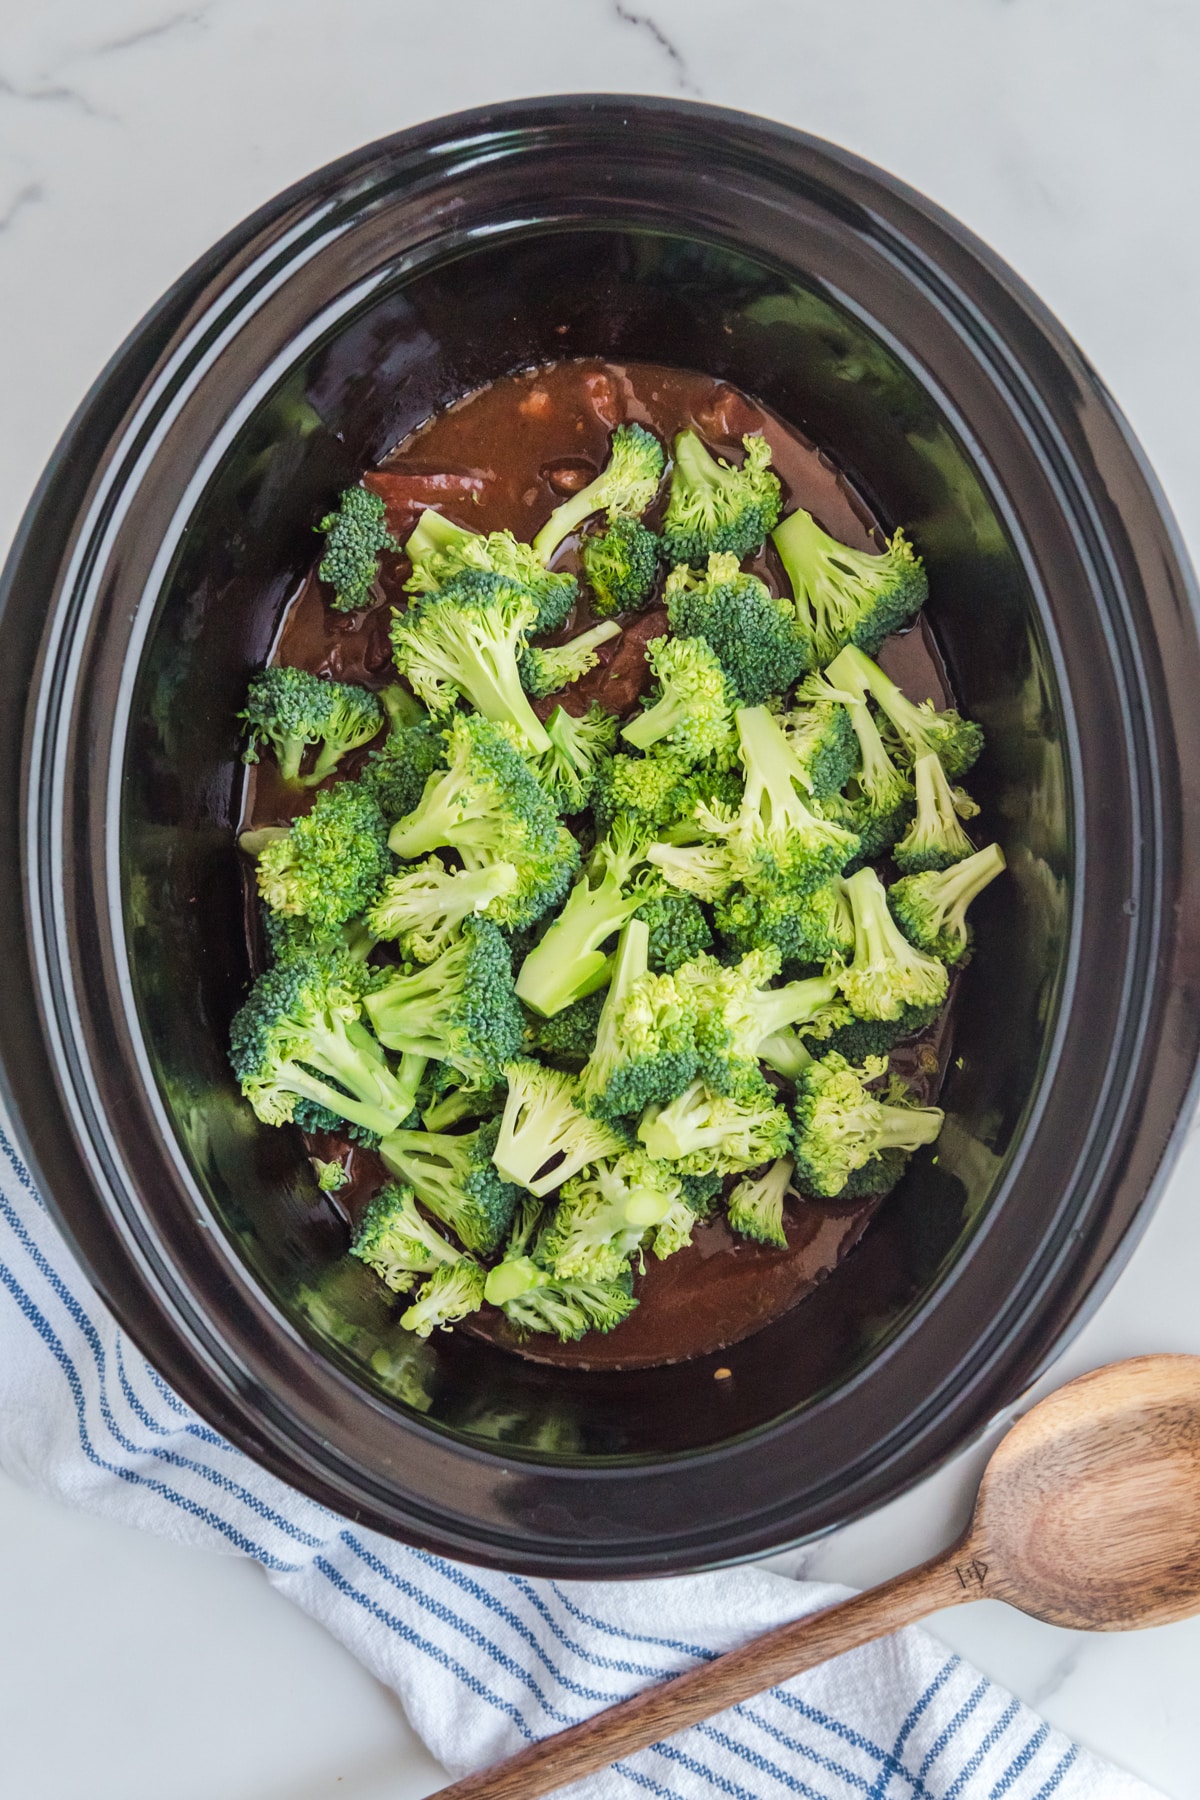 A bowl of broccoli in a slow cooker.